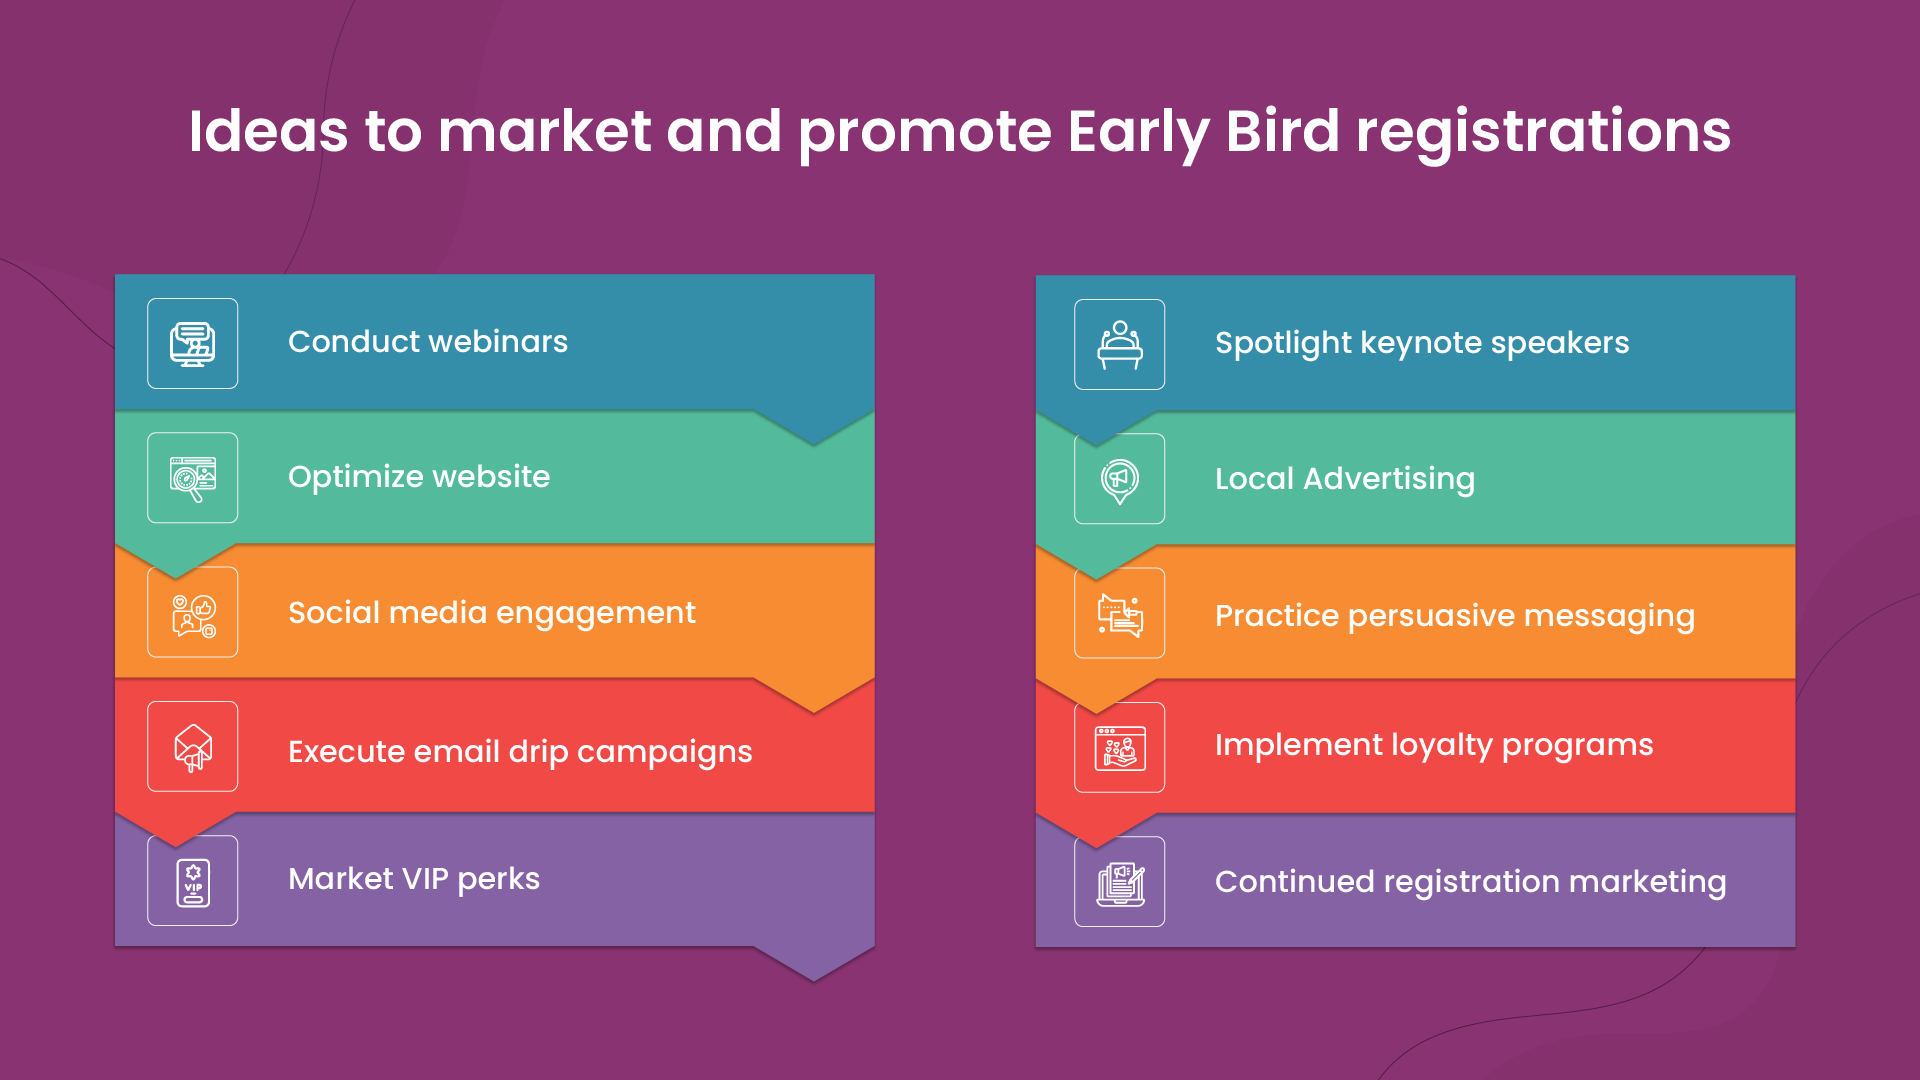 Ideas to effectively market and promote Early Bird Registrations